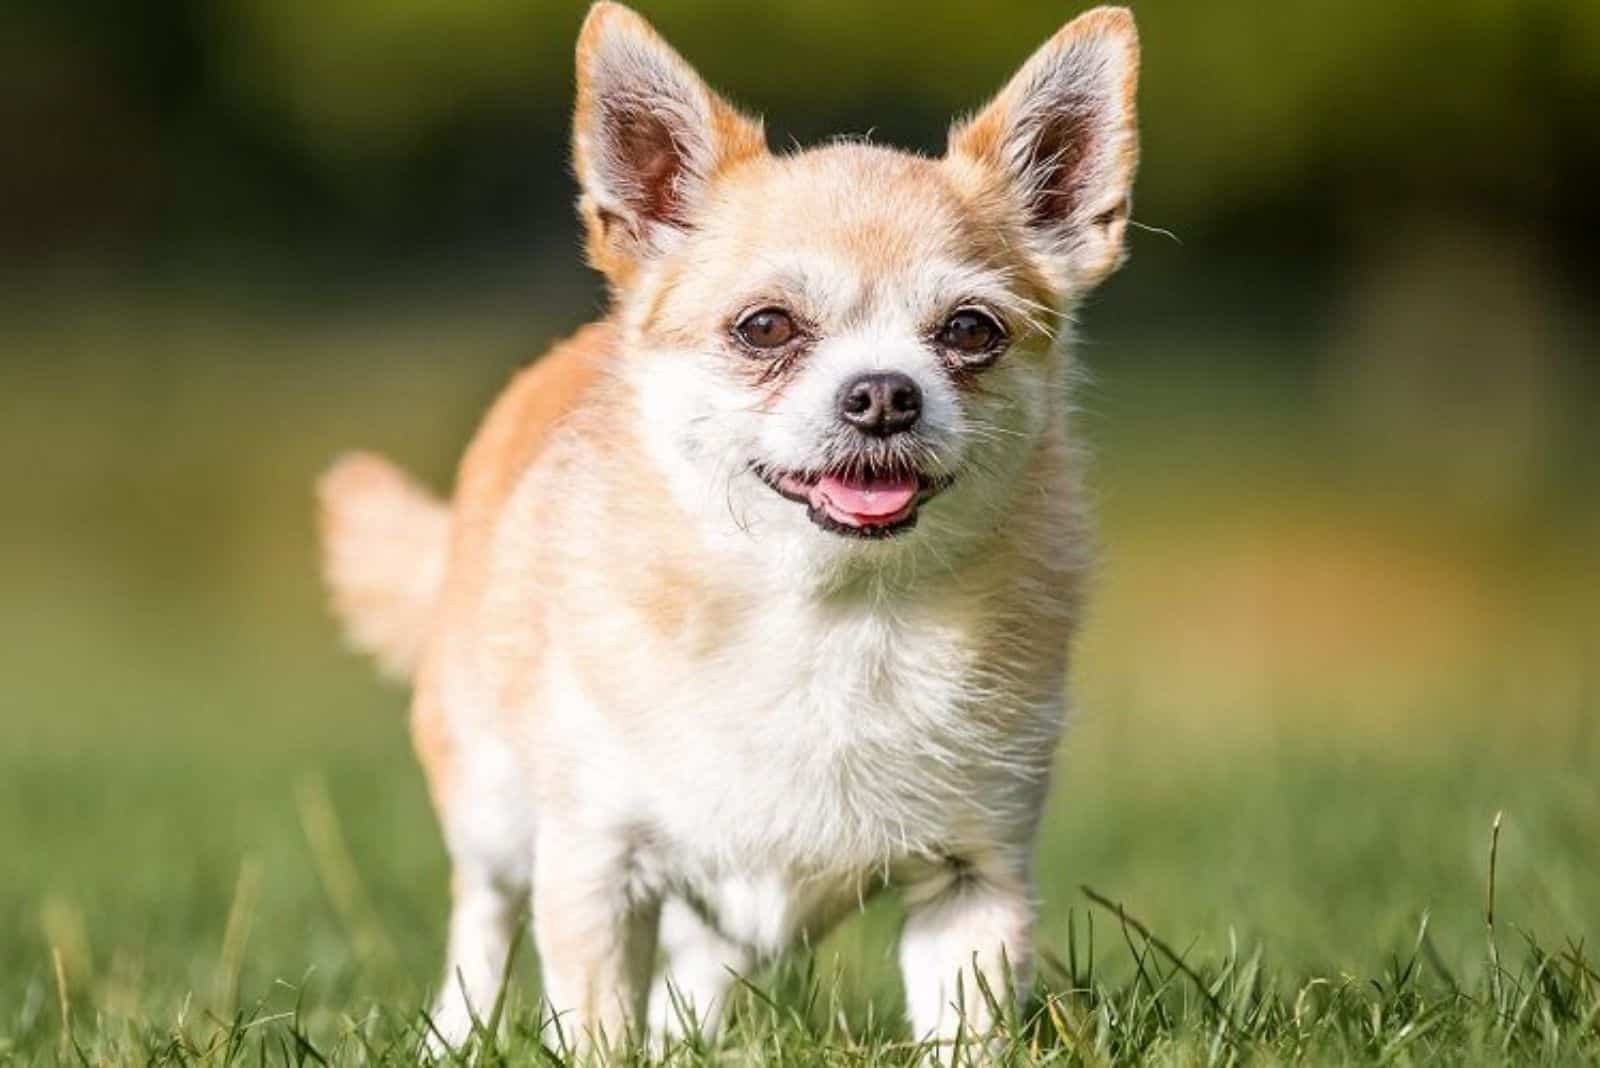 A Chihuahua is standing on the grass